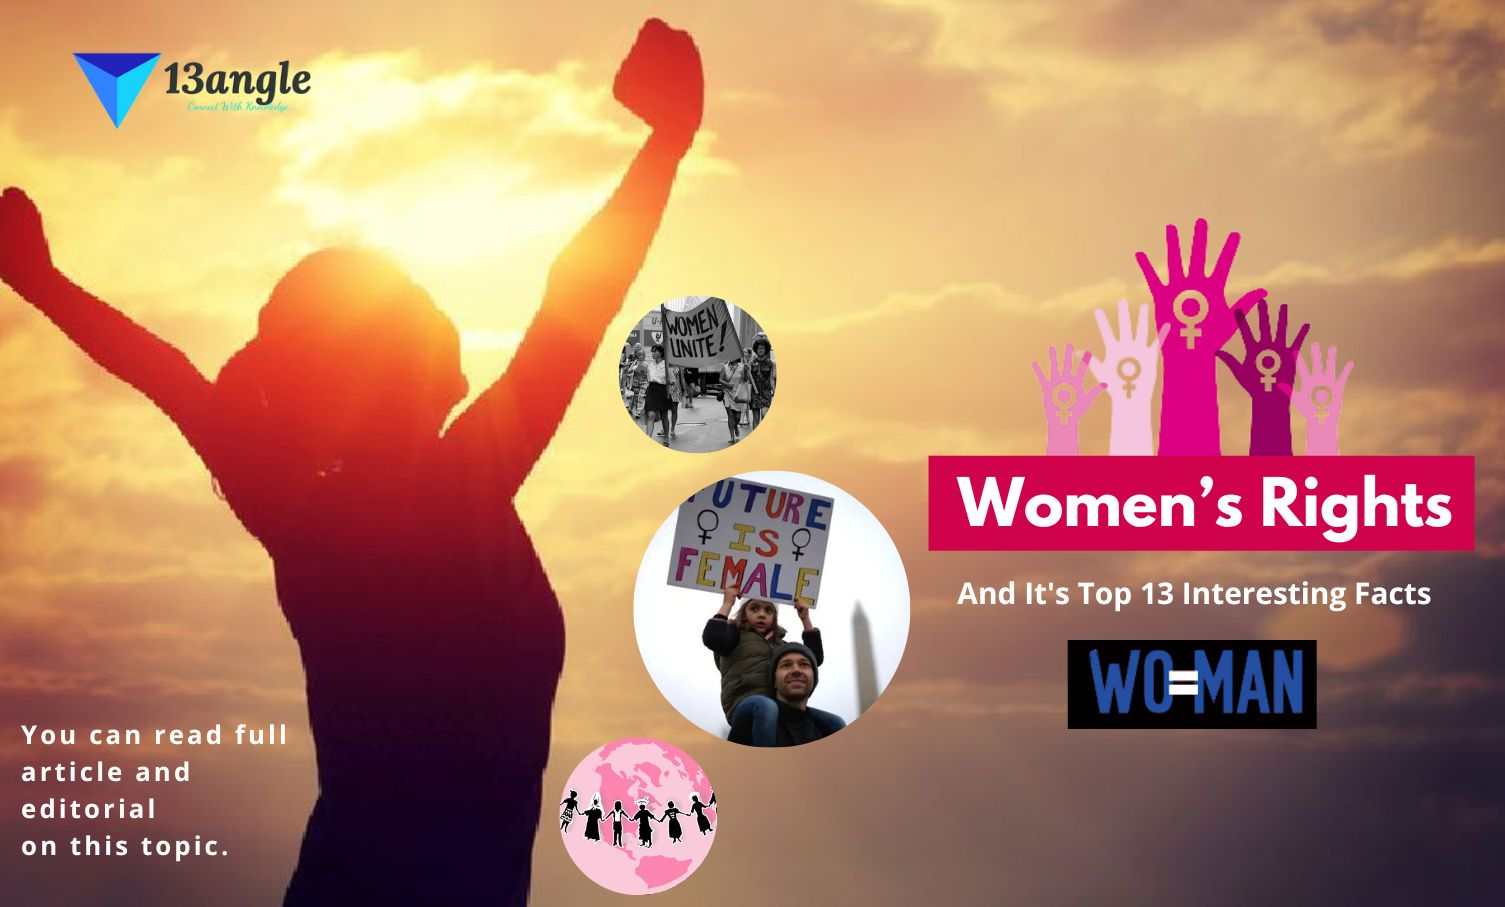 Women’s Rights And It's Top 13 Interesting Facts- 13angle.com